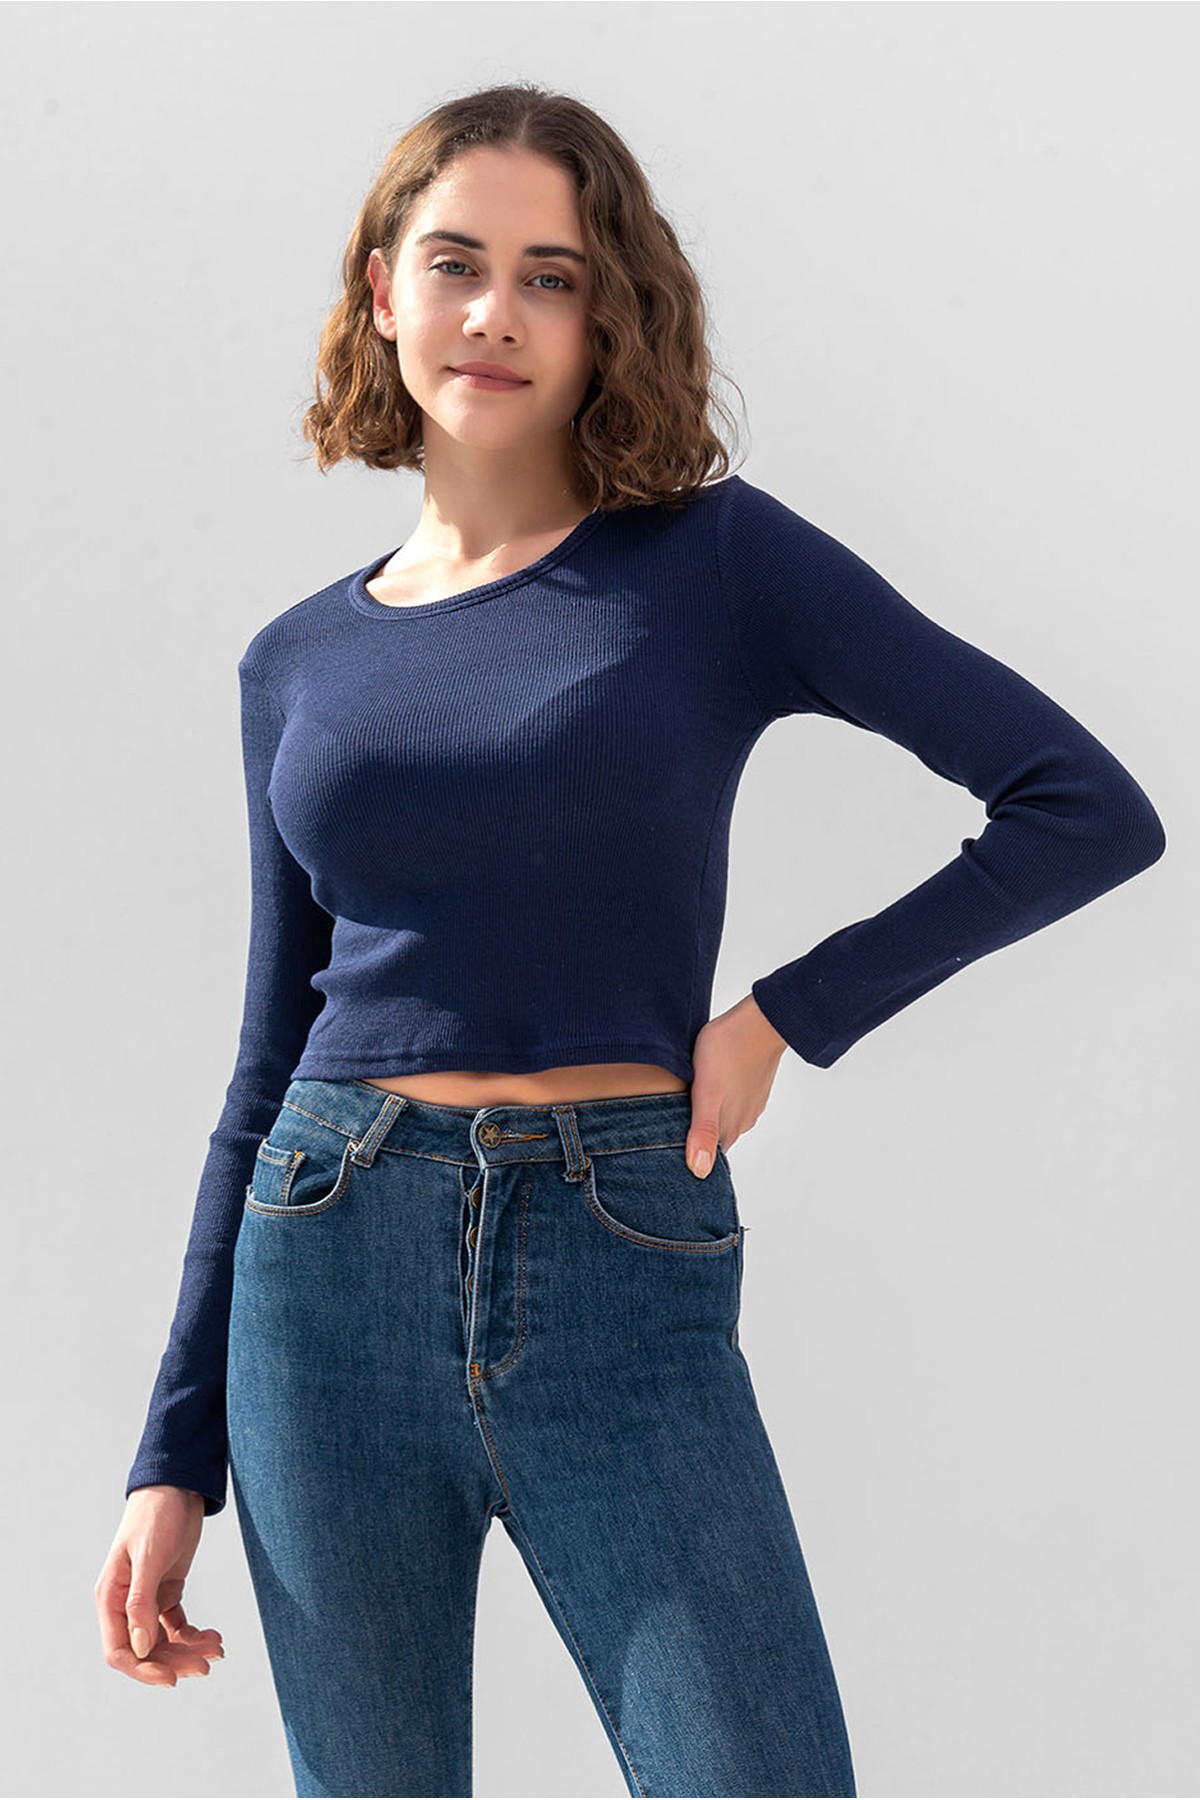 Baby Blue Long Sleeve Ribbed Blouse Crop Knitted T-shirt - Dark Navy Blue